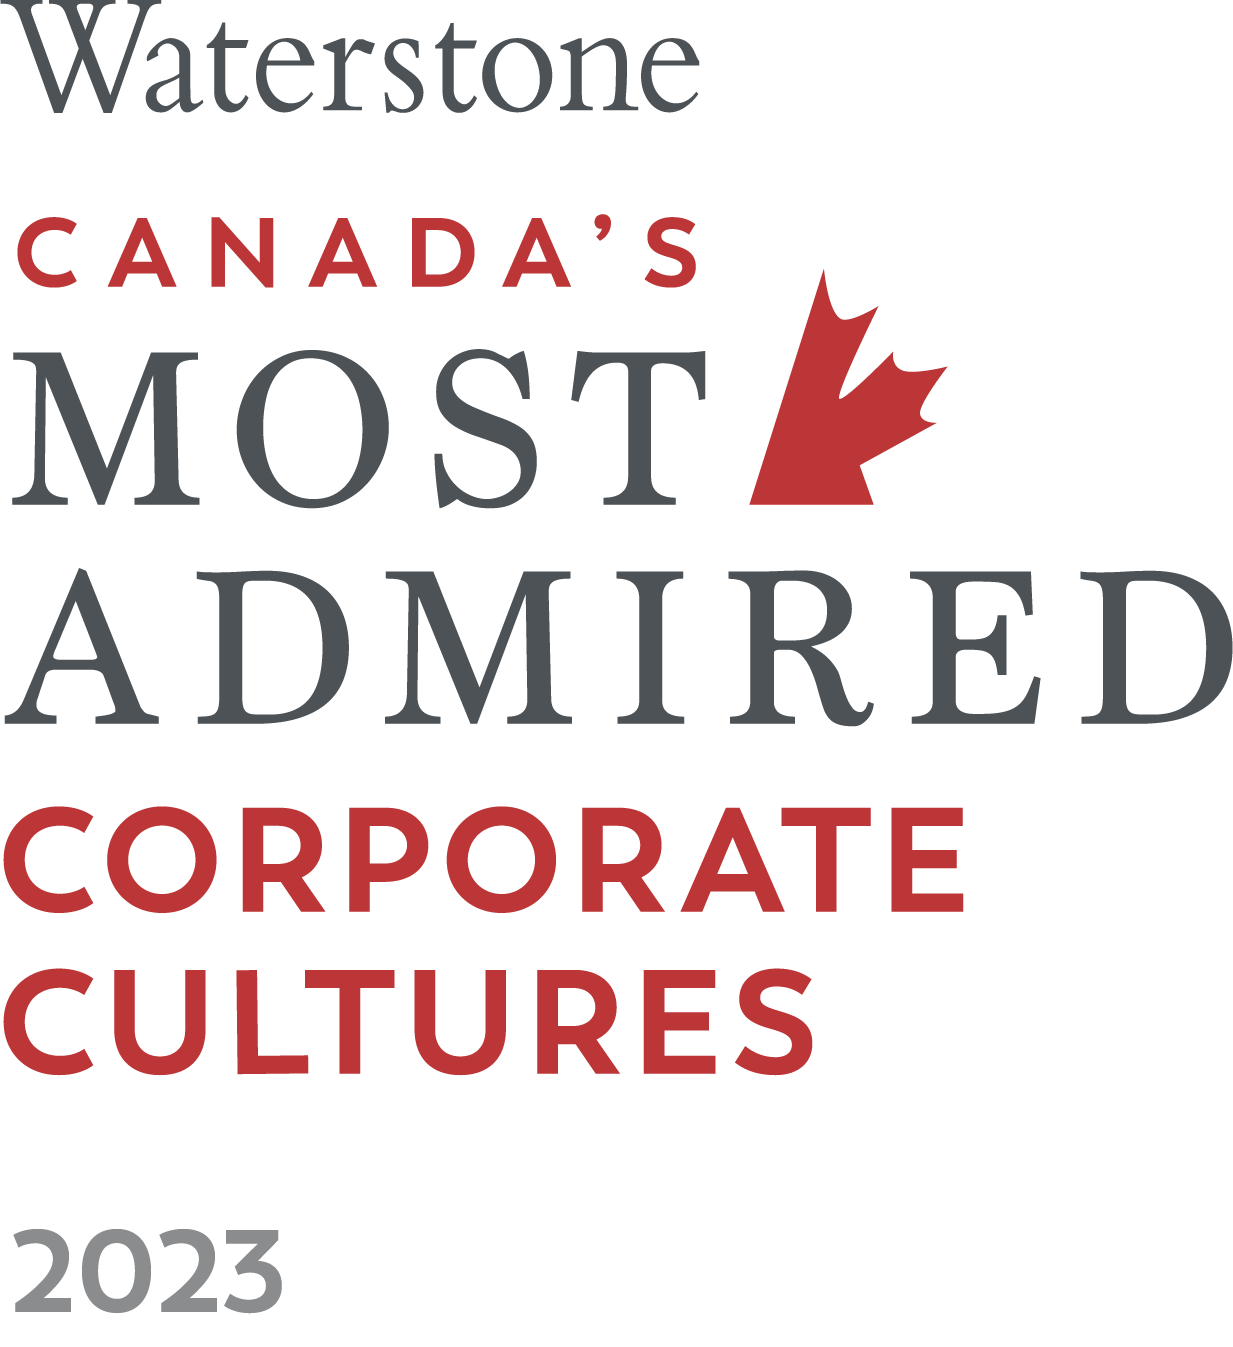 Canada's Most Admired Corporate Cultures - 2023